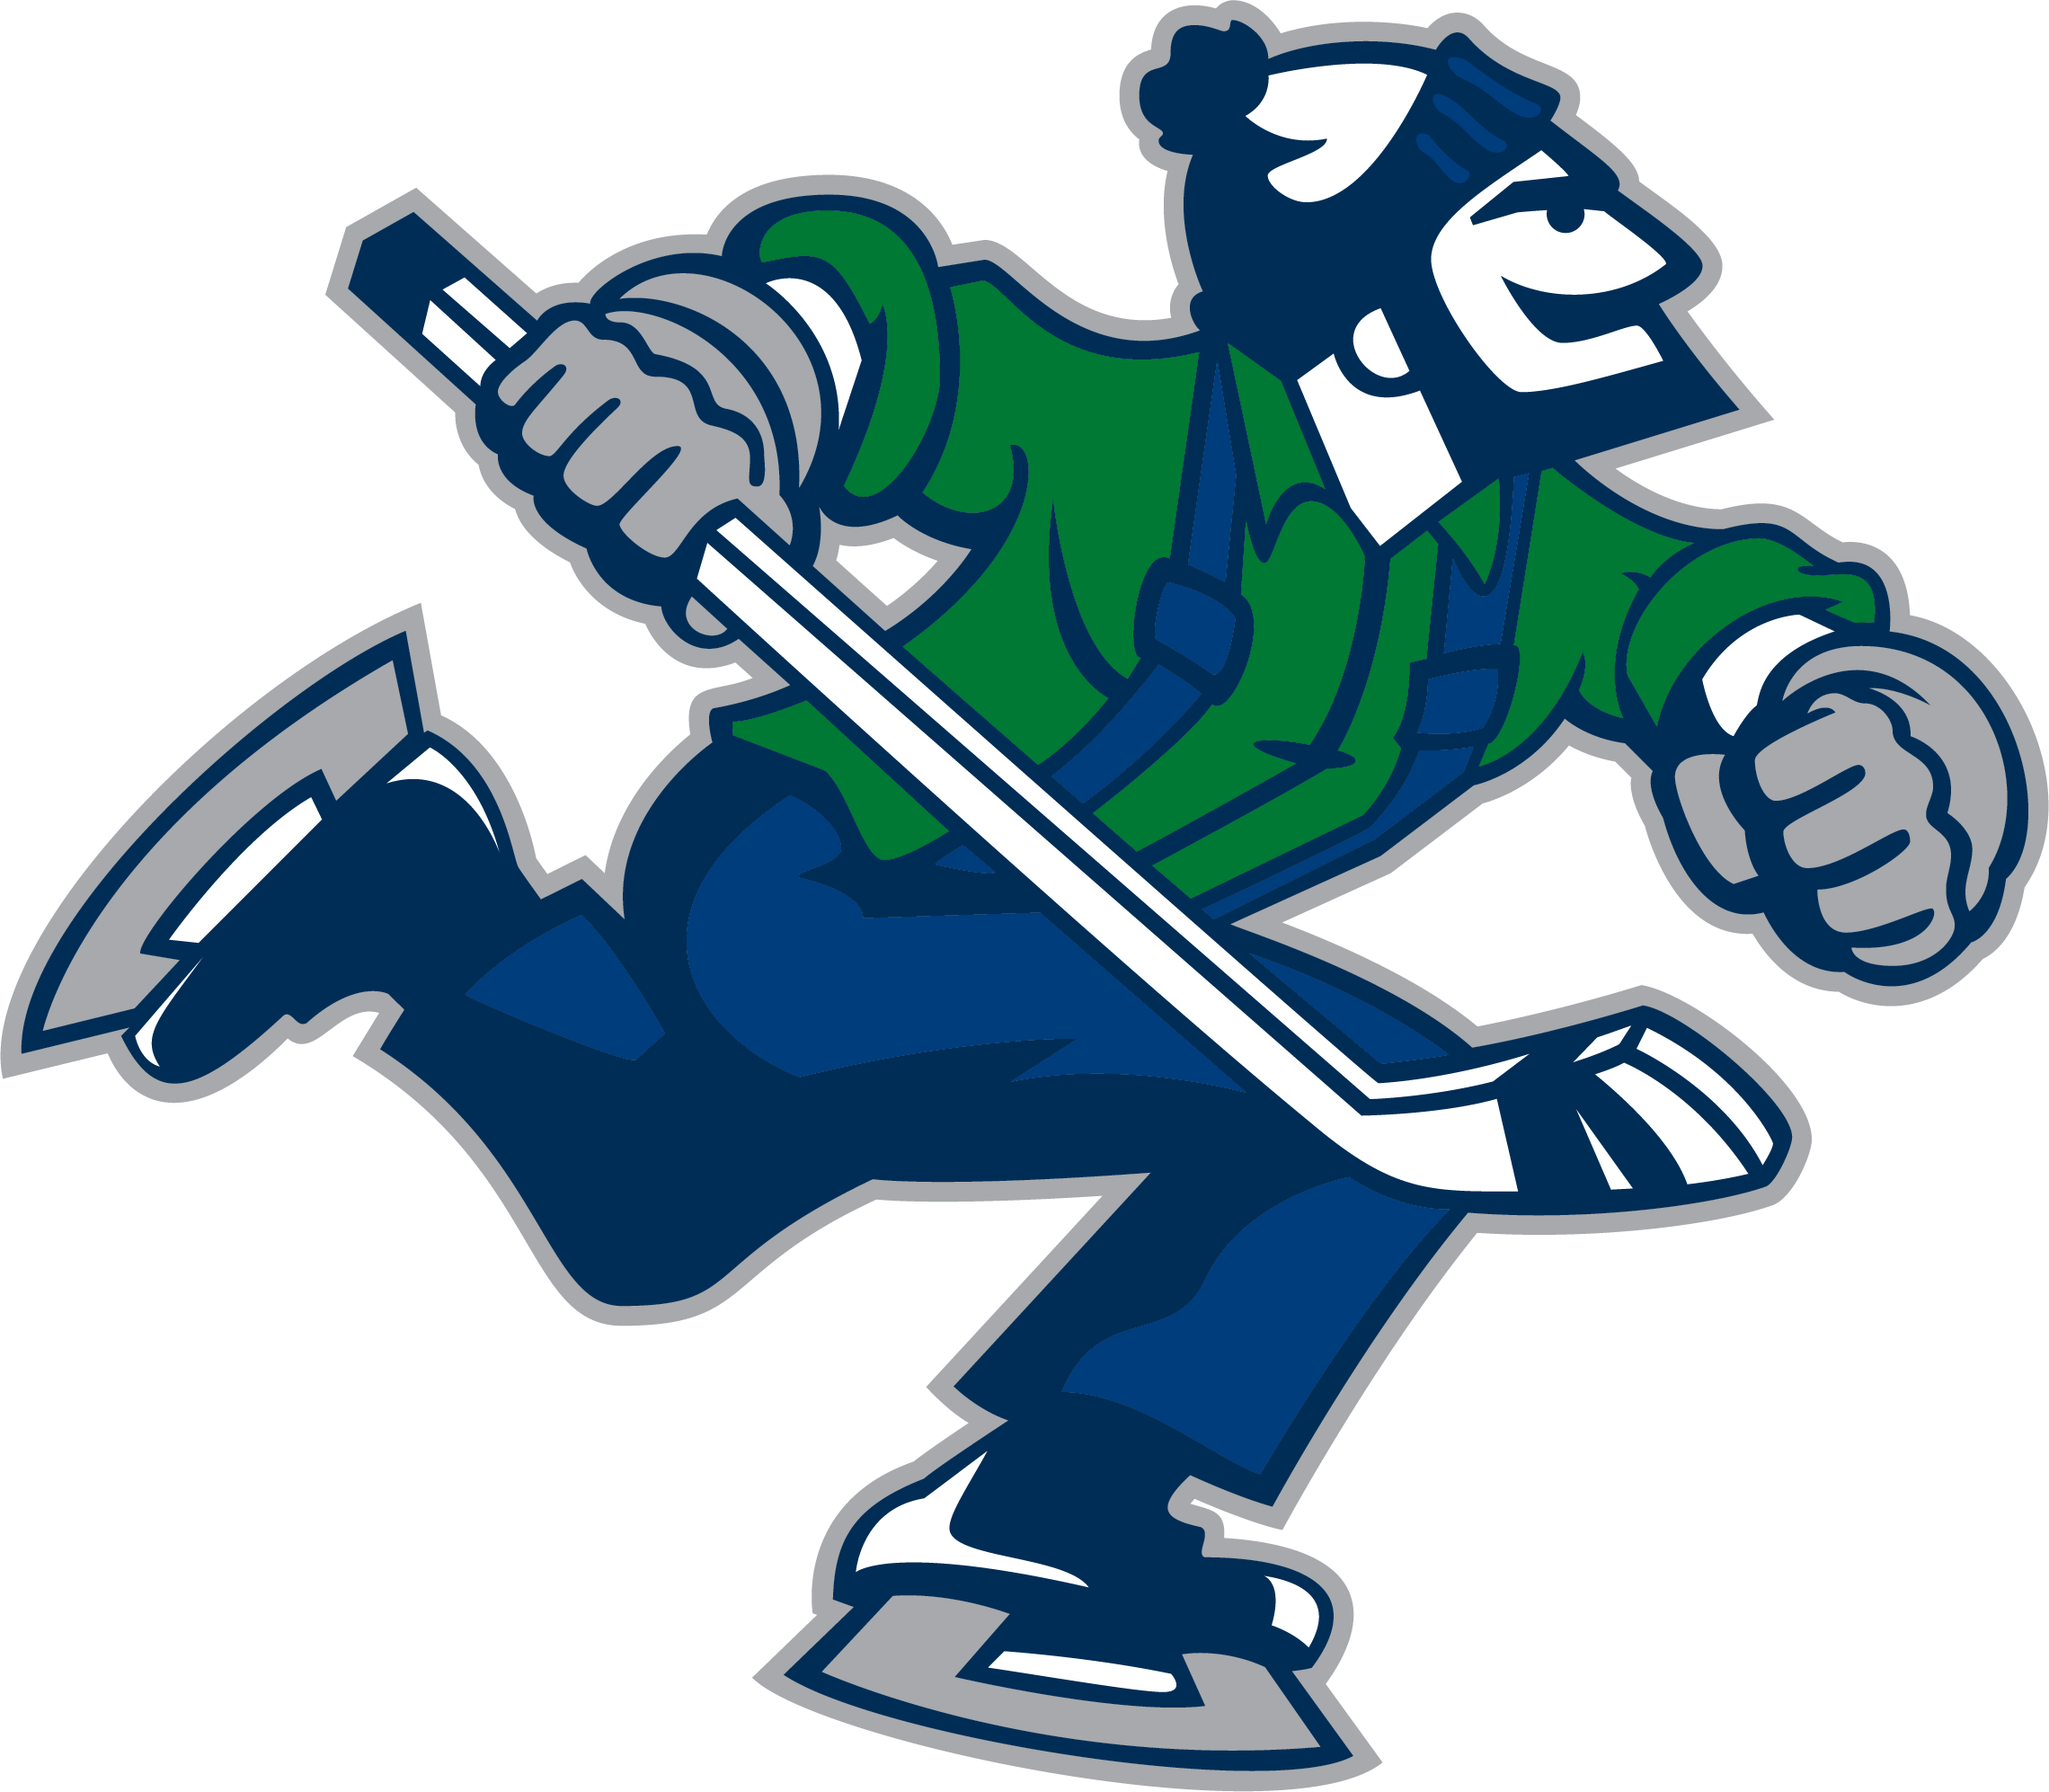 Animated character logo depicting a hockey player in motion. The player is wearing a green jersey with blue pants and skates, and a winter hat. They are handling a hockey stick. The character is outlined against a black background.